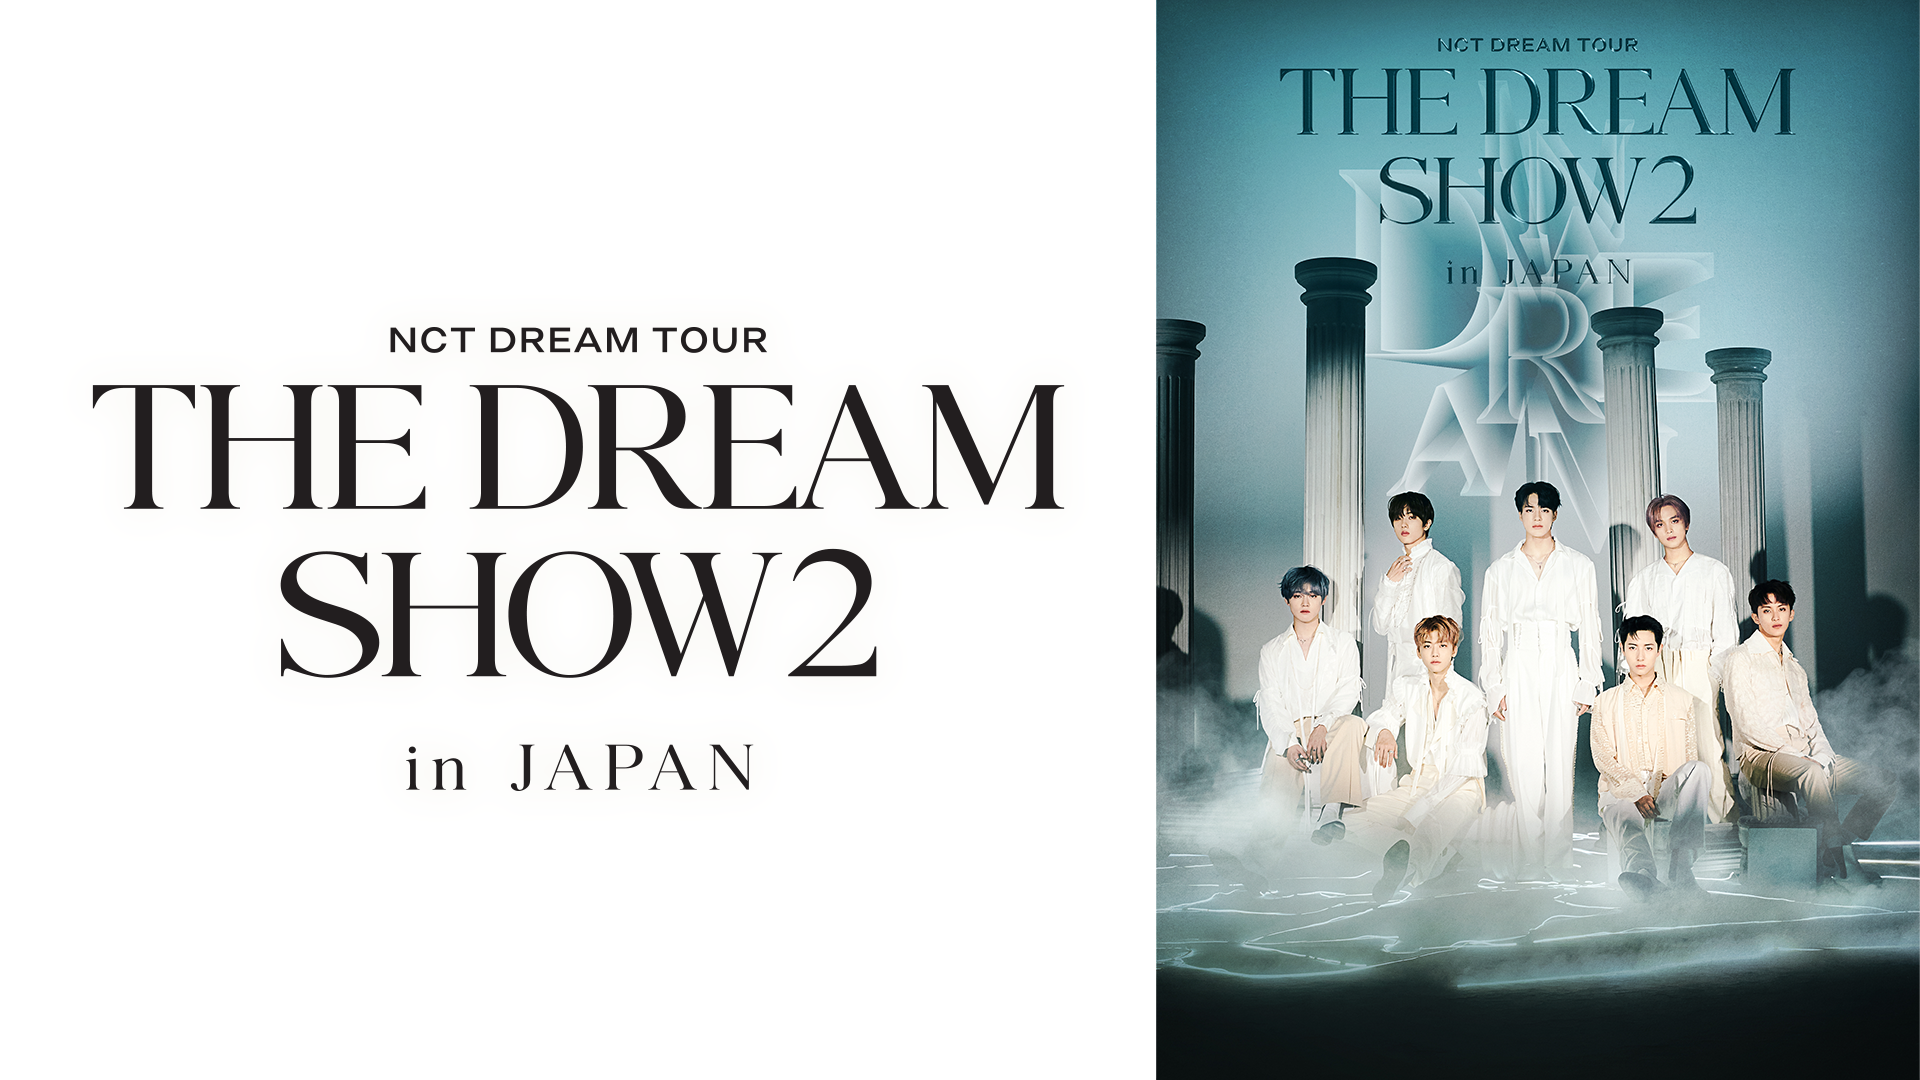 THE DREAM SHOW2 In A DREAM in JAPAN中身のトレカロンジュンチソン 